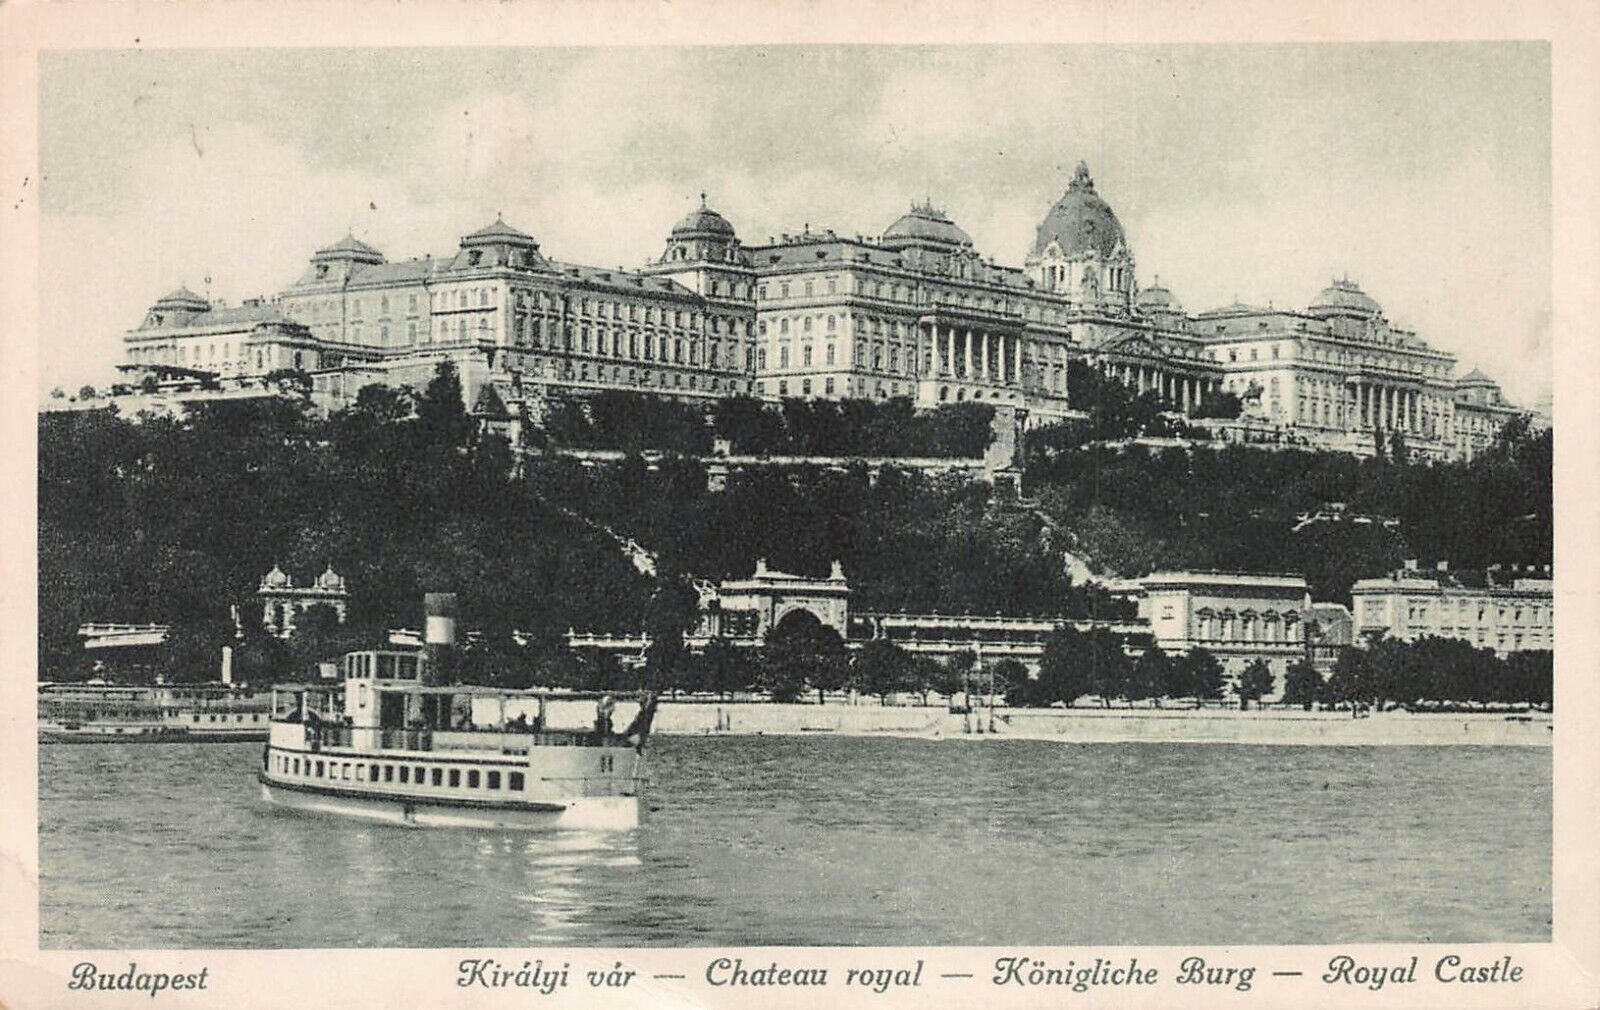 Royal Castle, Budapest, Hungary, Early Postcard, Used, Sent to New York City